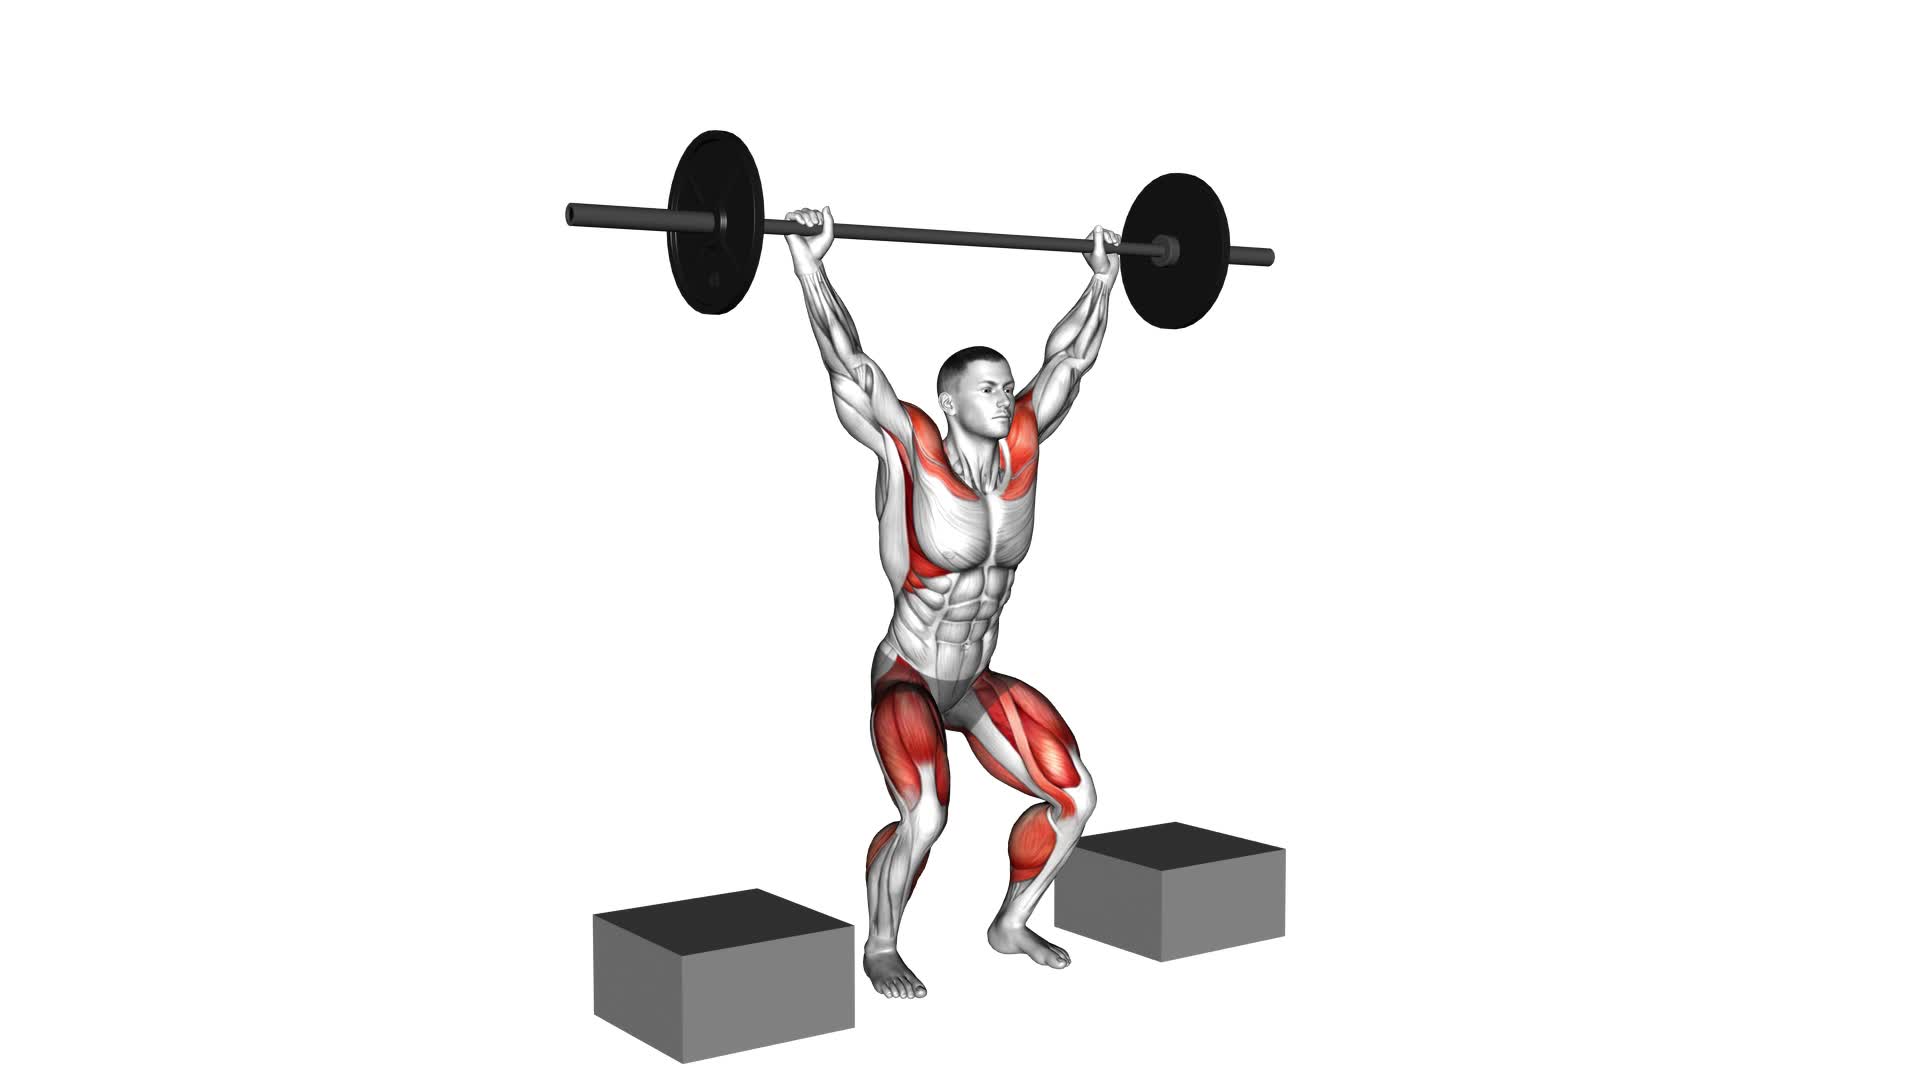 Barbell Snatch From Blocks - Video Exercise Guide & Tips